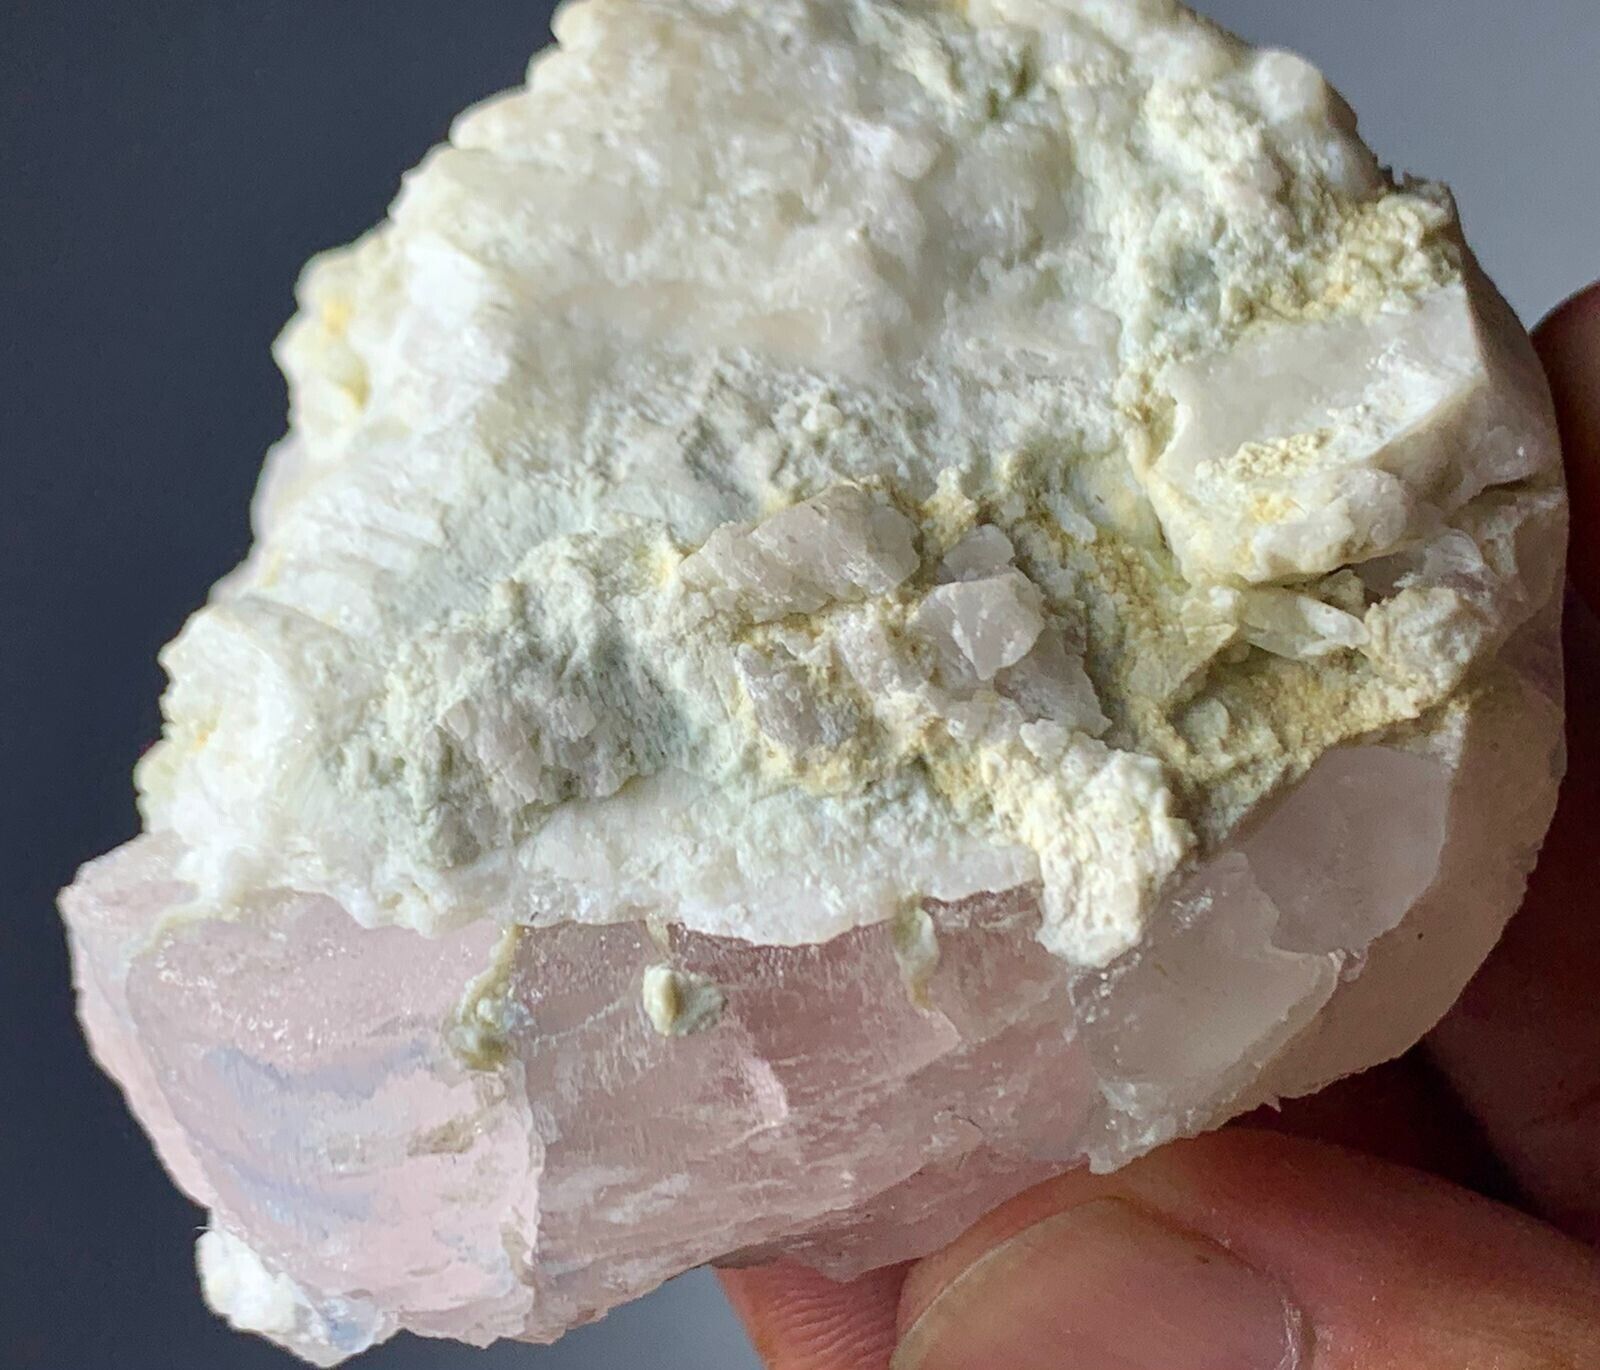 926 Cts Beautiful Quality Terminated Morganite Crystal Specimen from Afghanistan